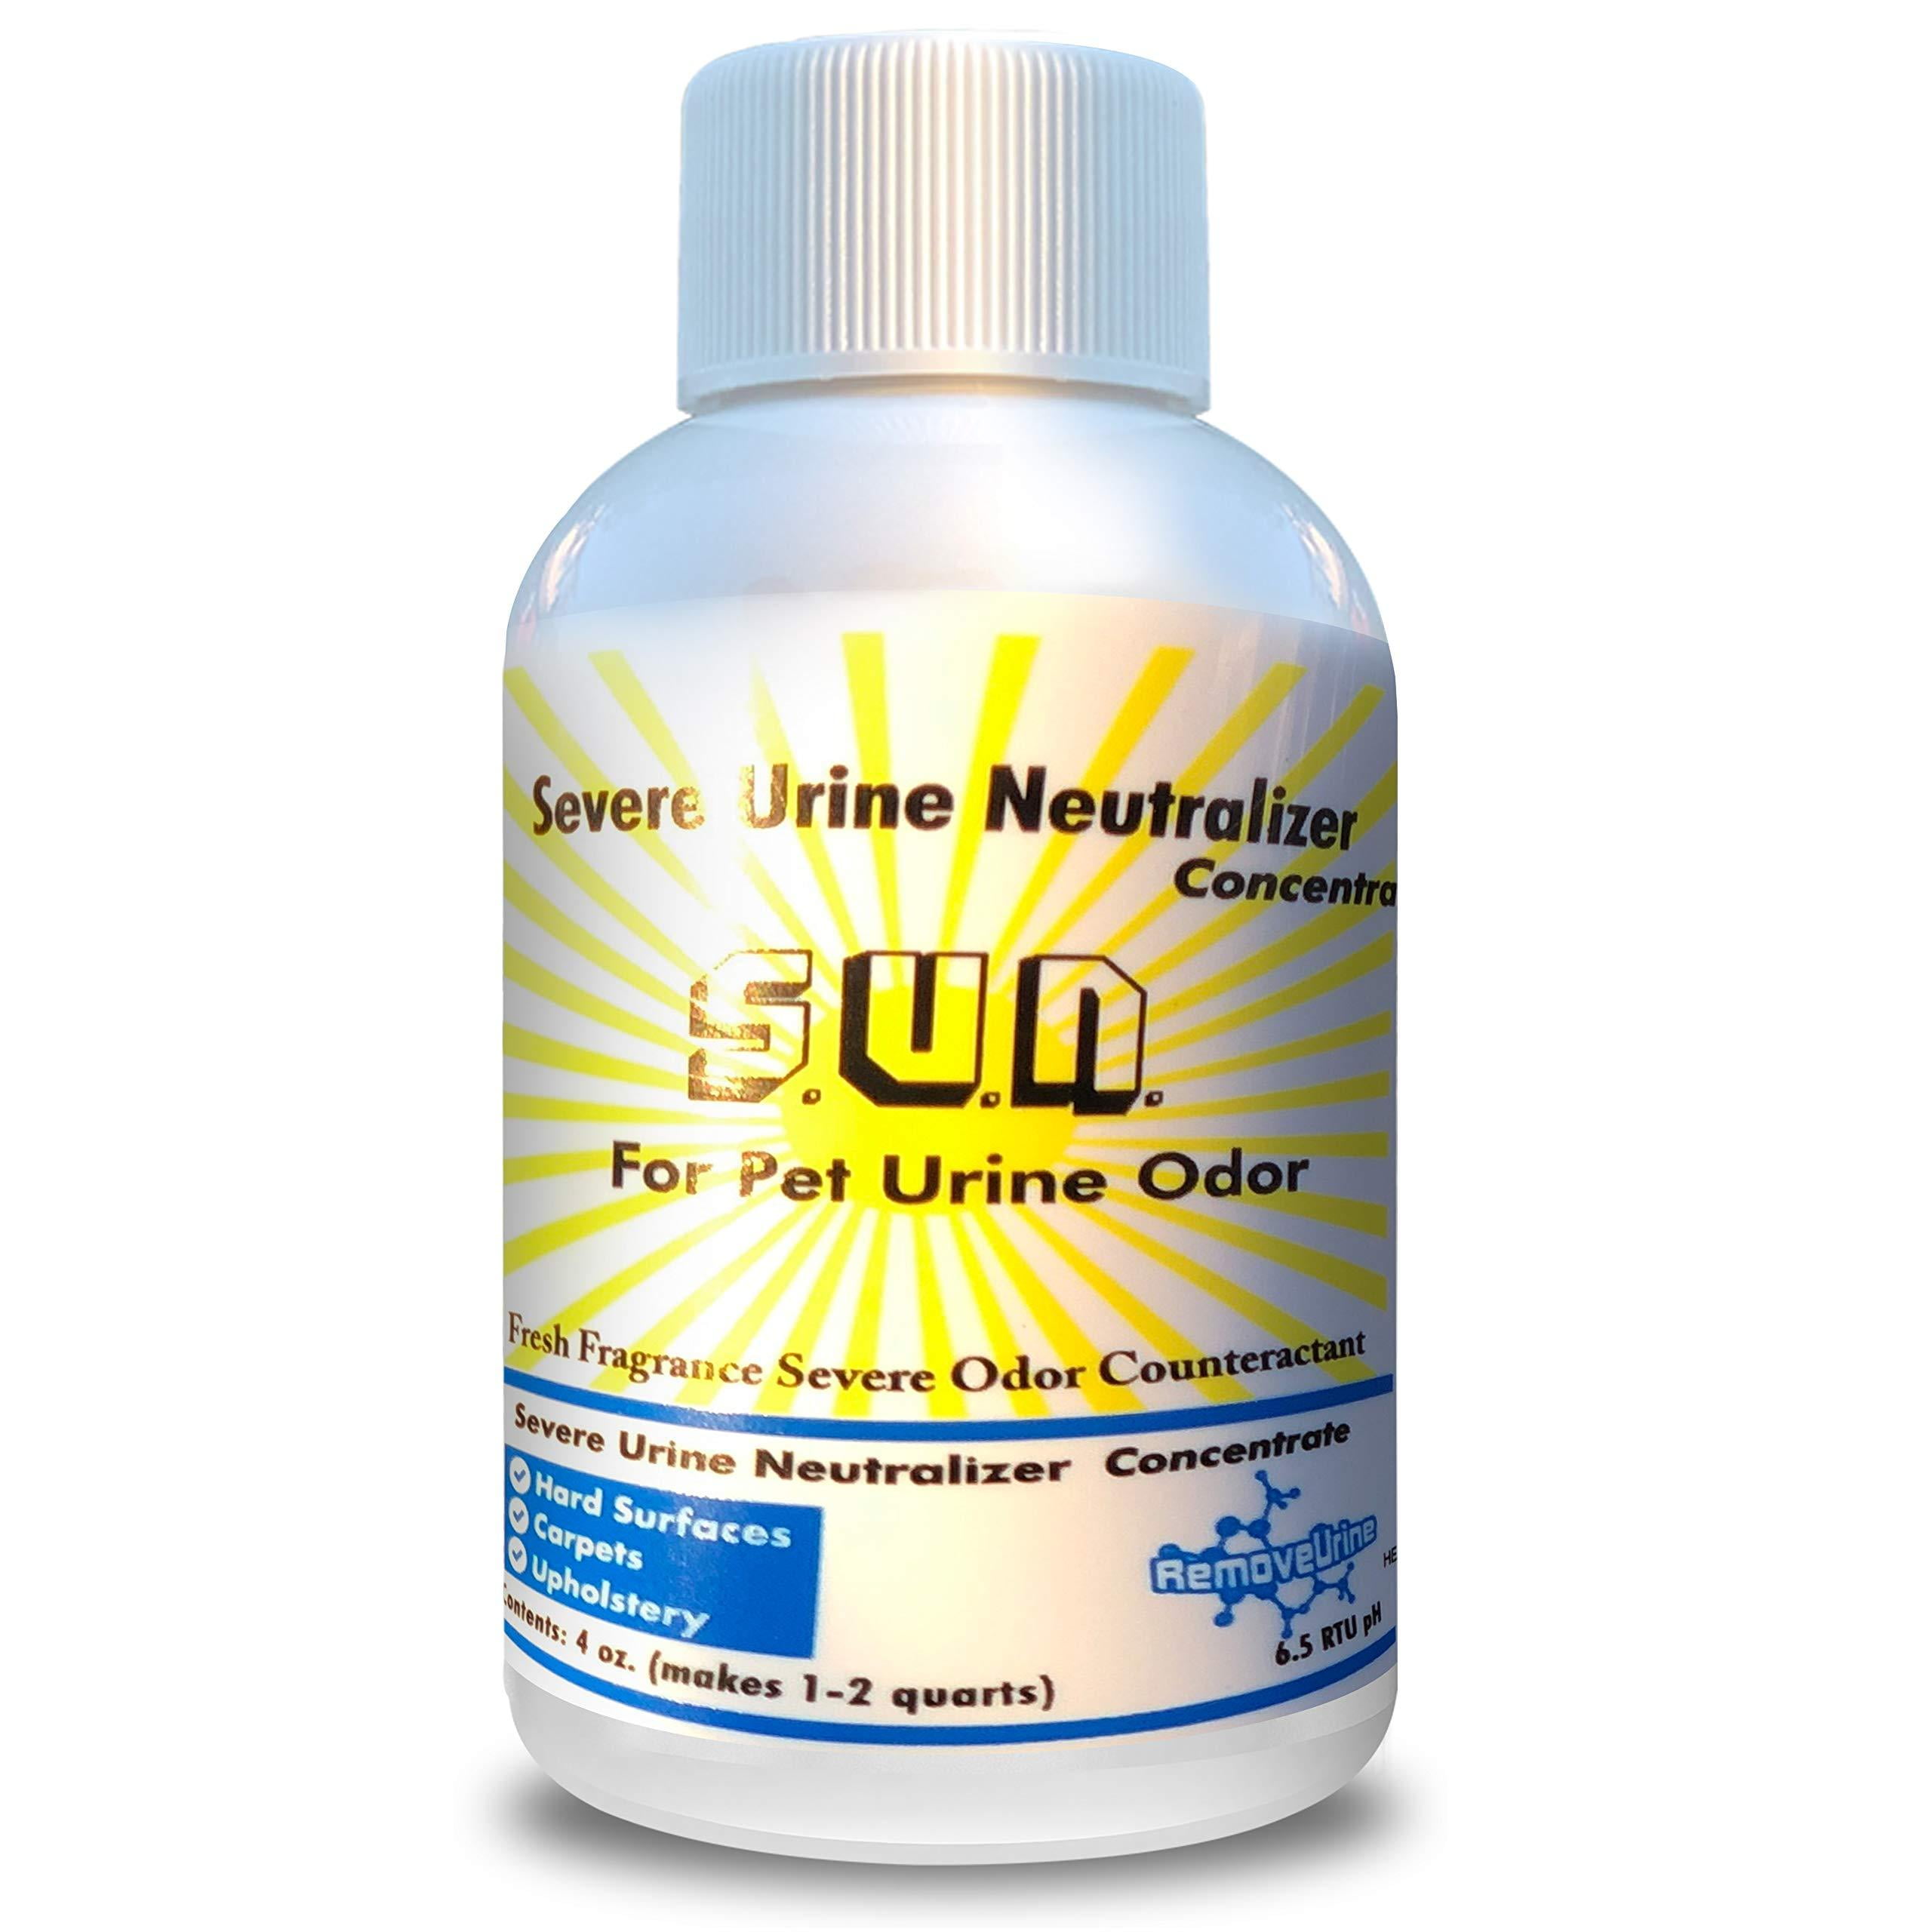 REMOVEURINE Severe Urine Neutralizer for Dog and Cat Urine - Best Odor  Eliminator and Stain Remover for Carpet, Hardwood Floors, Concrete,  Mattress,